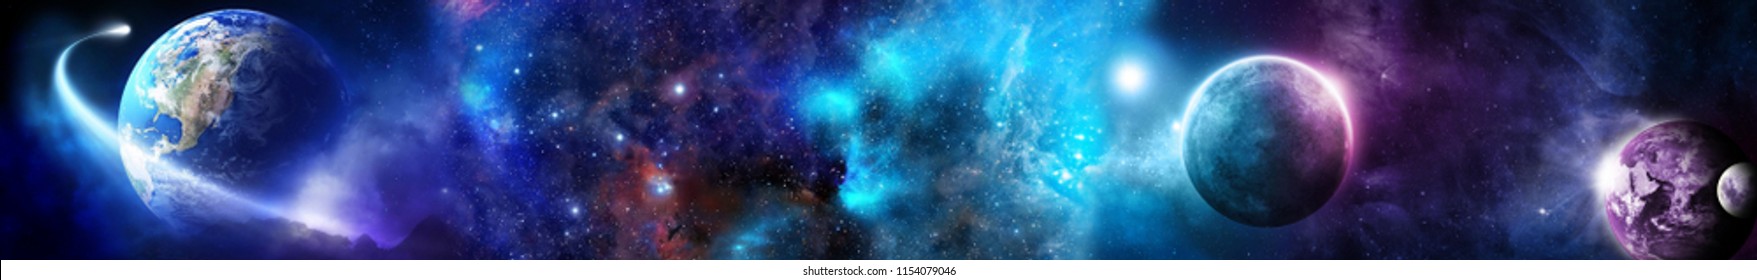 Space scene with planets, stars and galaxies. Panorama. Horizontal view for a glass panels (skinali).